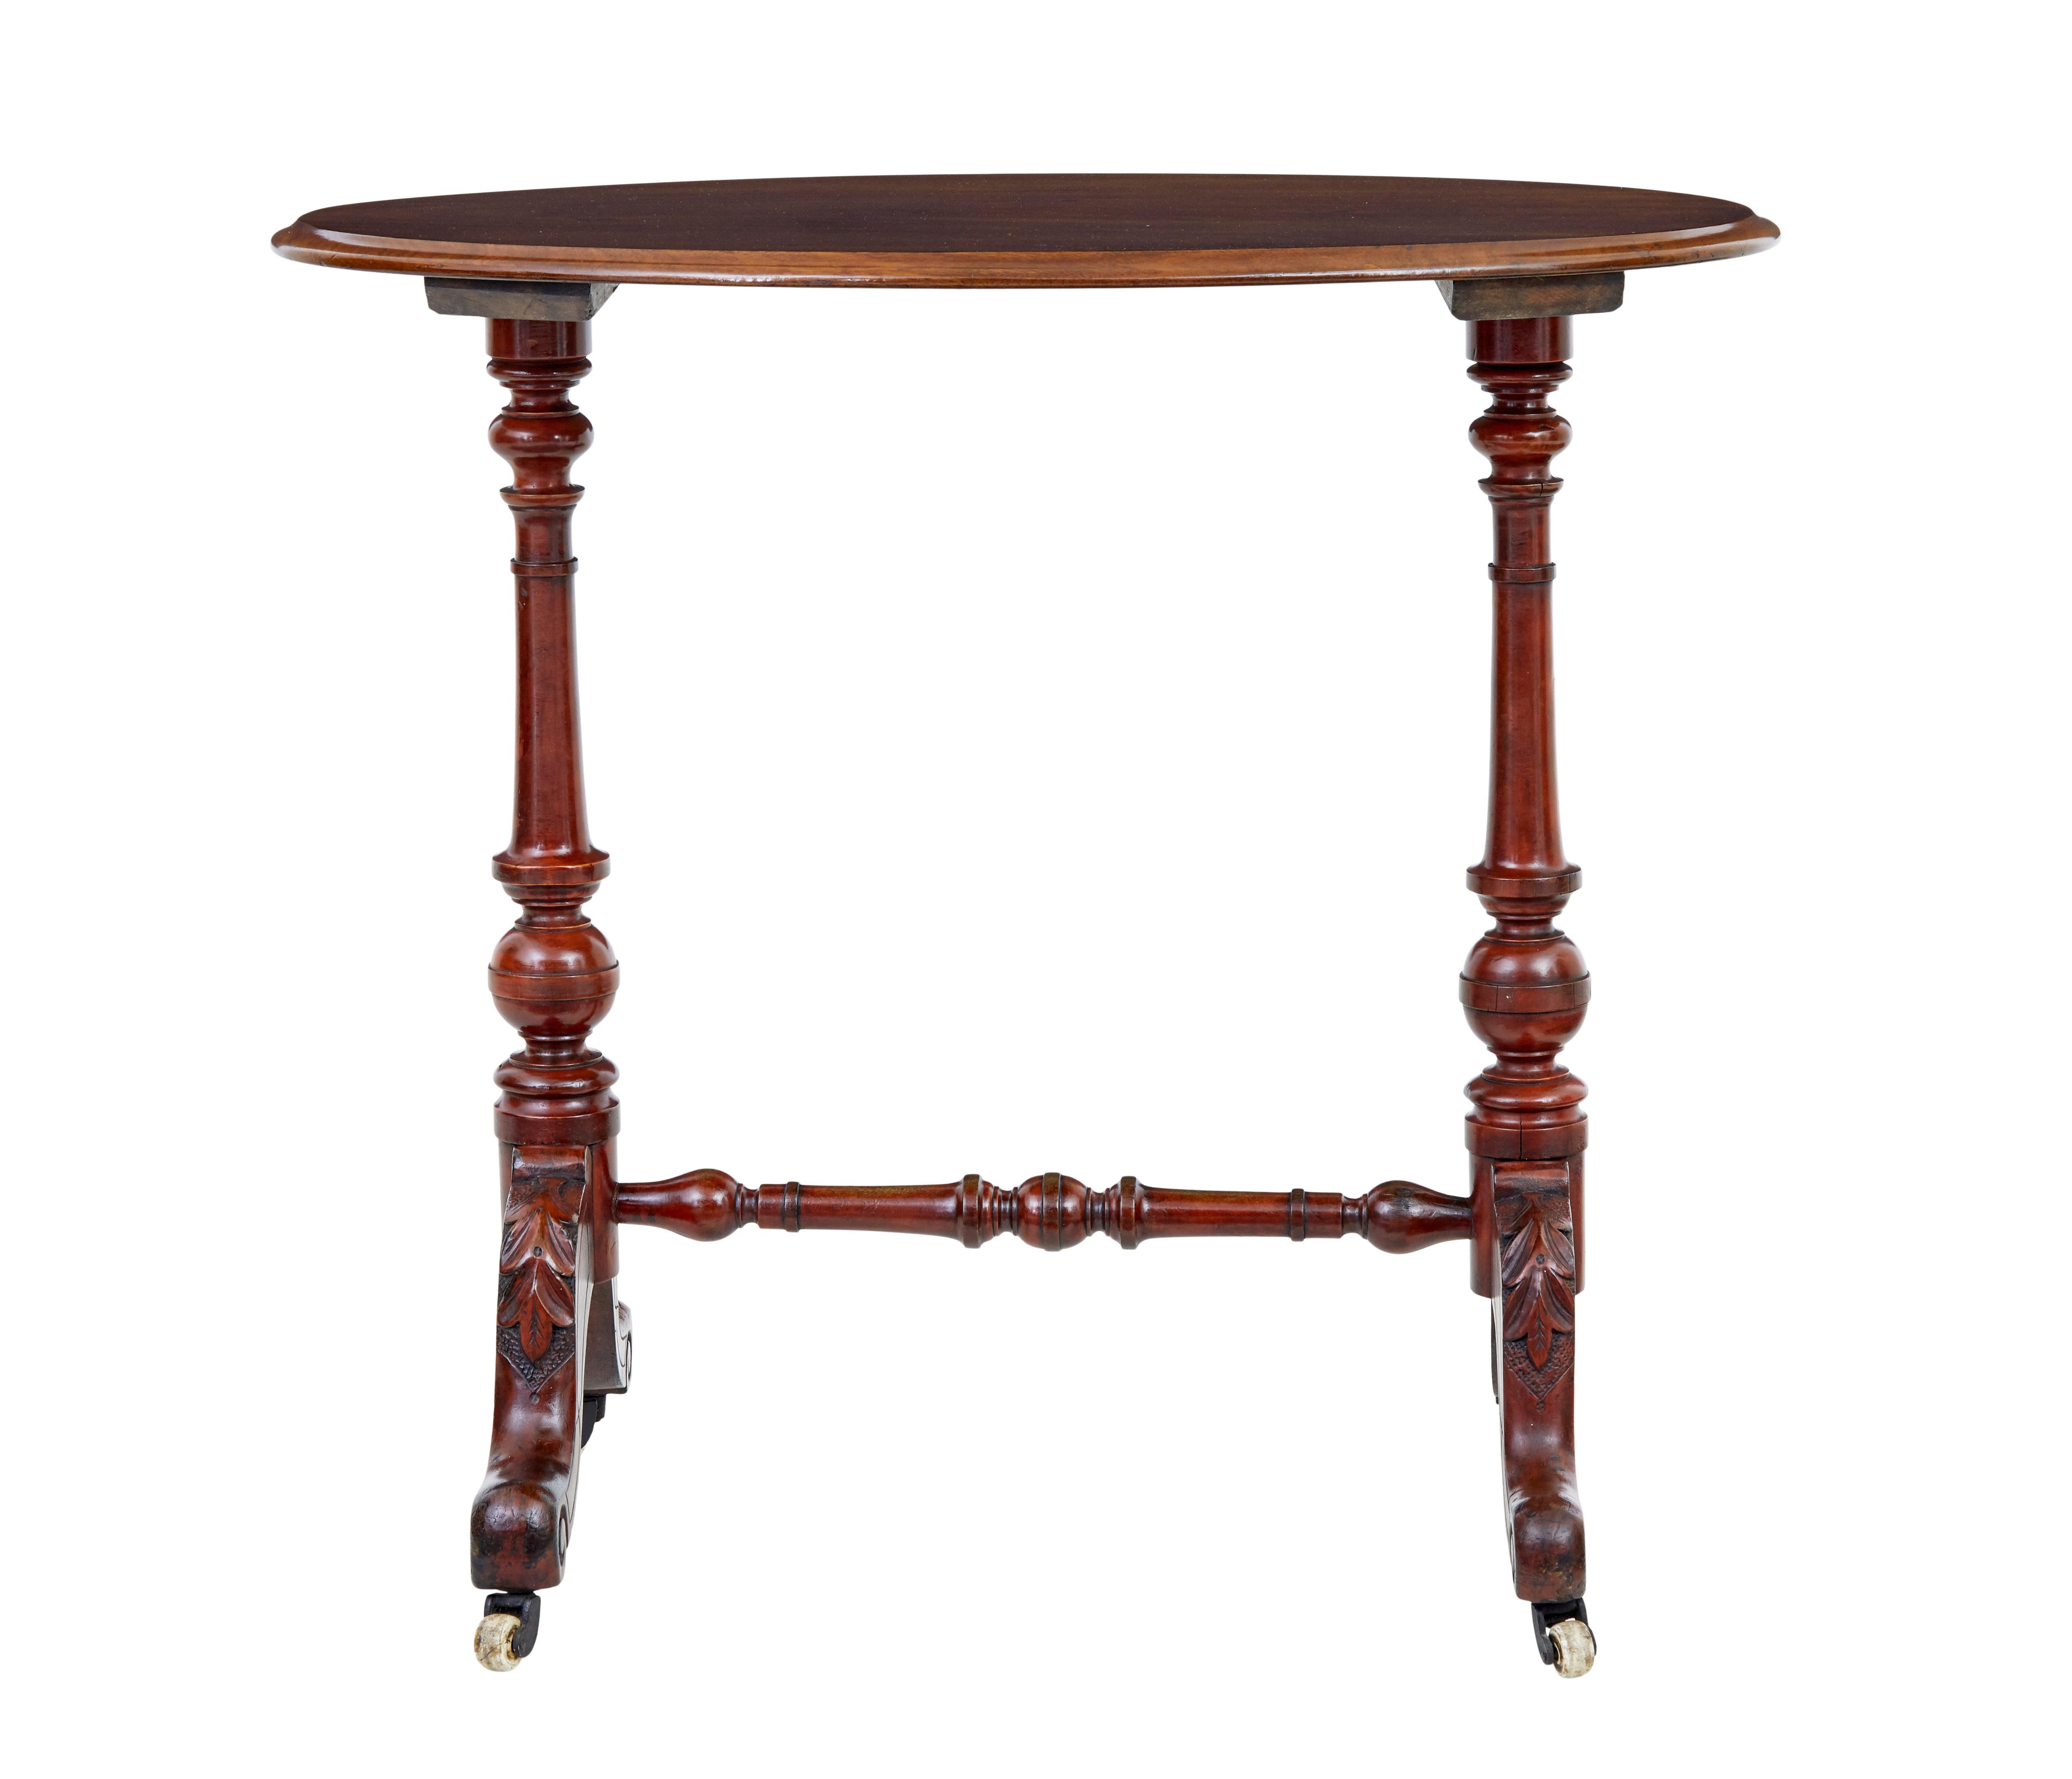 Functional piece of Victorian furniture circa 1870.

Oval walnut top, on a typical Victorian turned base with scrolling feet and carved acanthus leaf detail.  Standing on ceramic castors.

Ideal for use as a side or lamp table.

Base with evidence